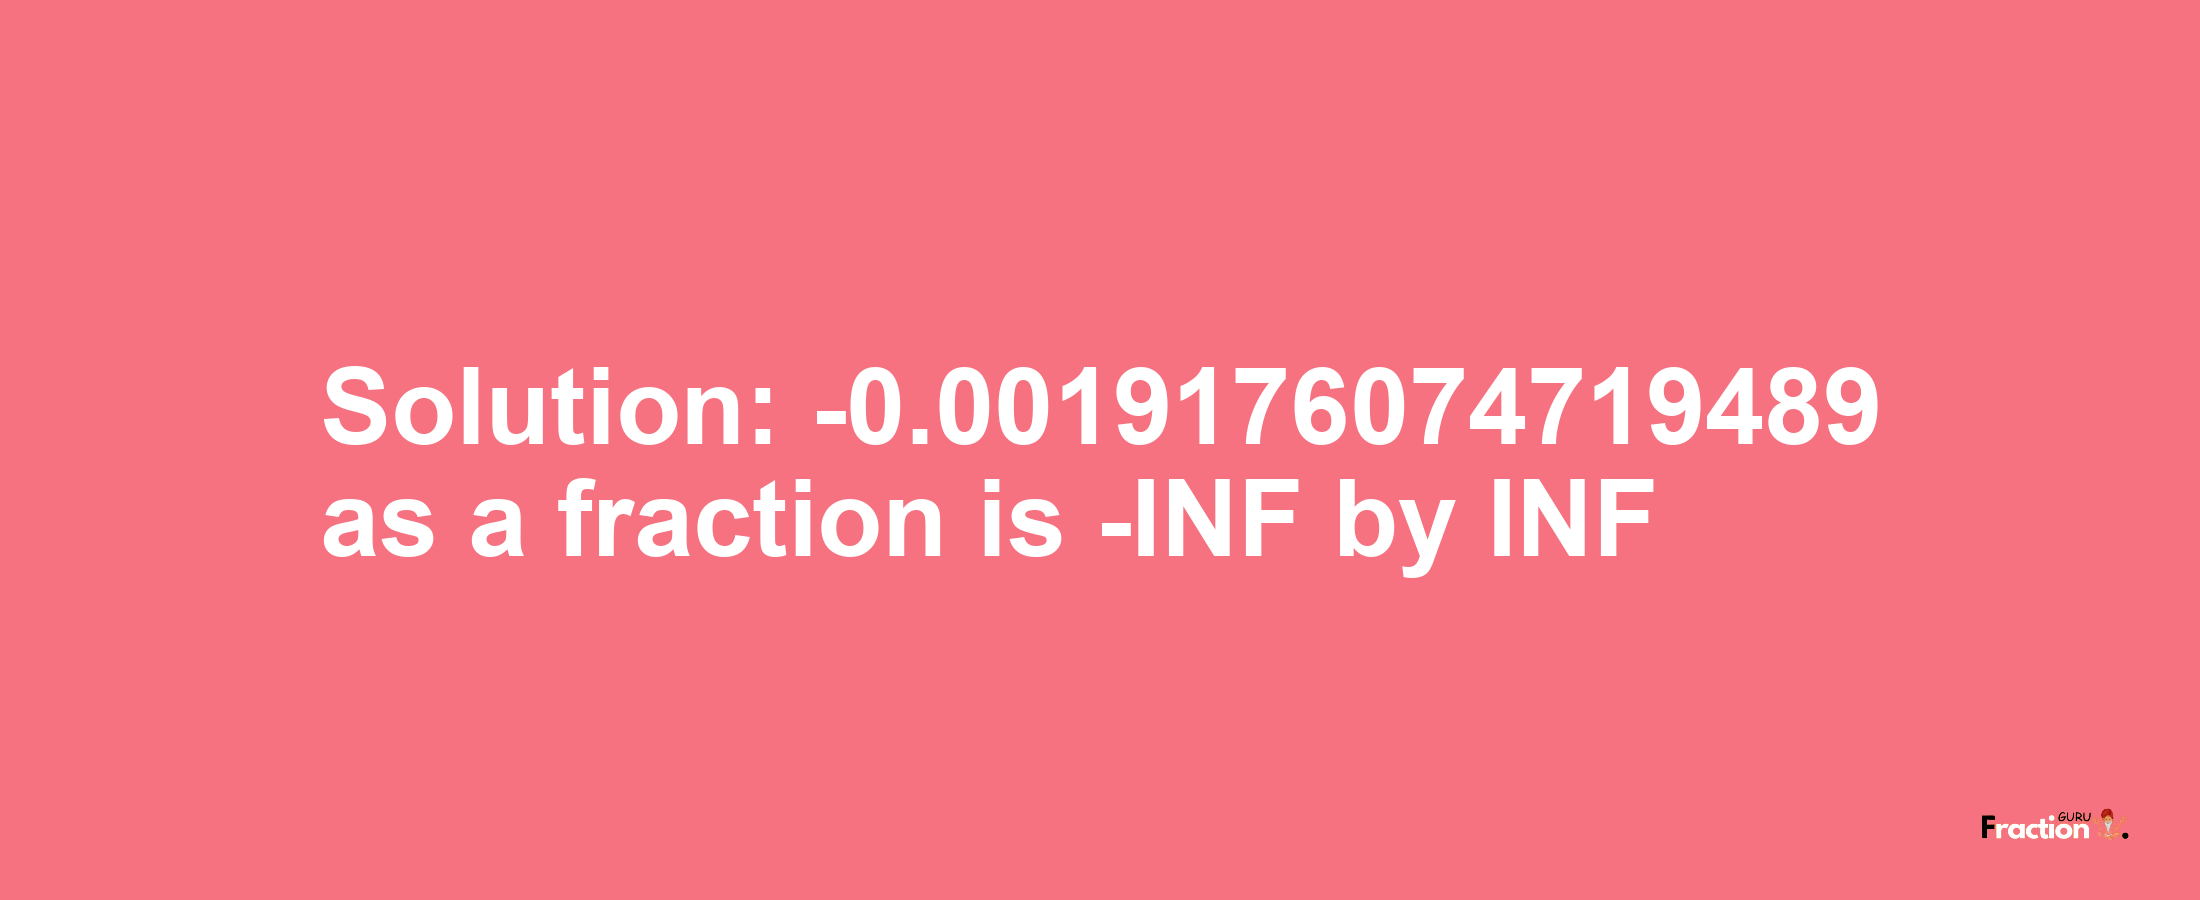 Solution:-0.0019176074719489 as a fraction is -INF/INF